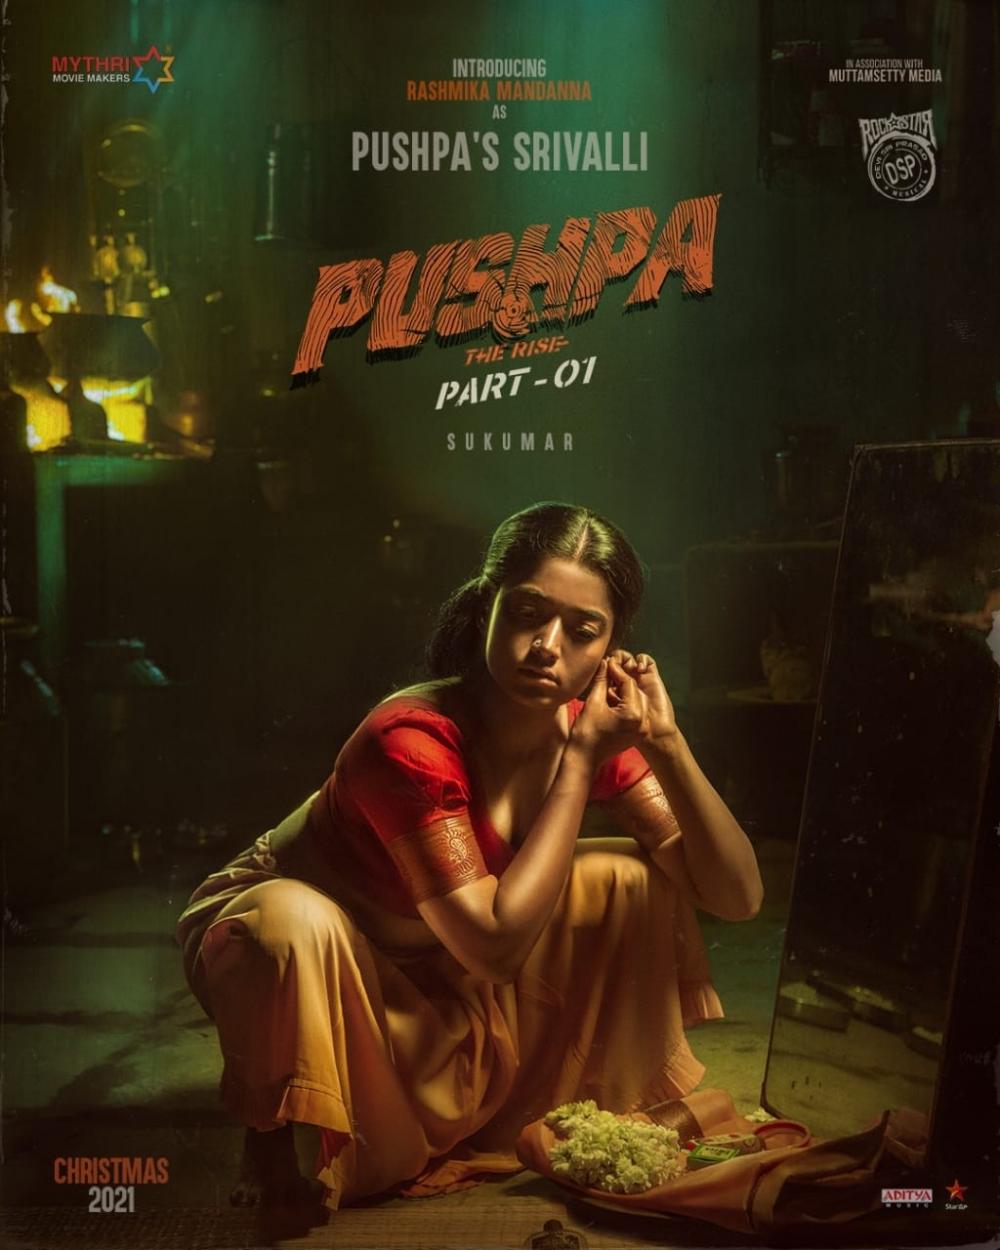 The Weekend Leader - Rashmika Mandanna's first look from 'Pushpa' unveiled